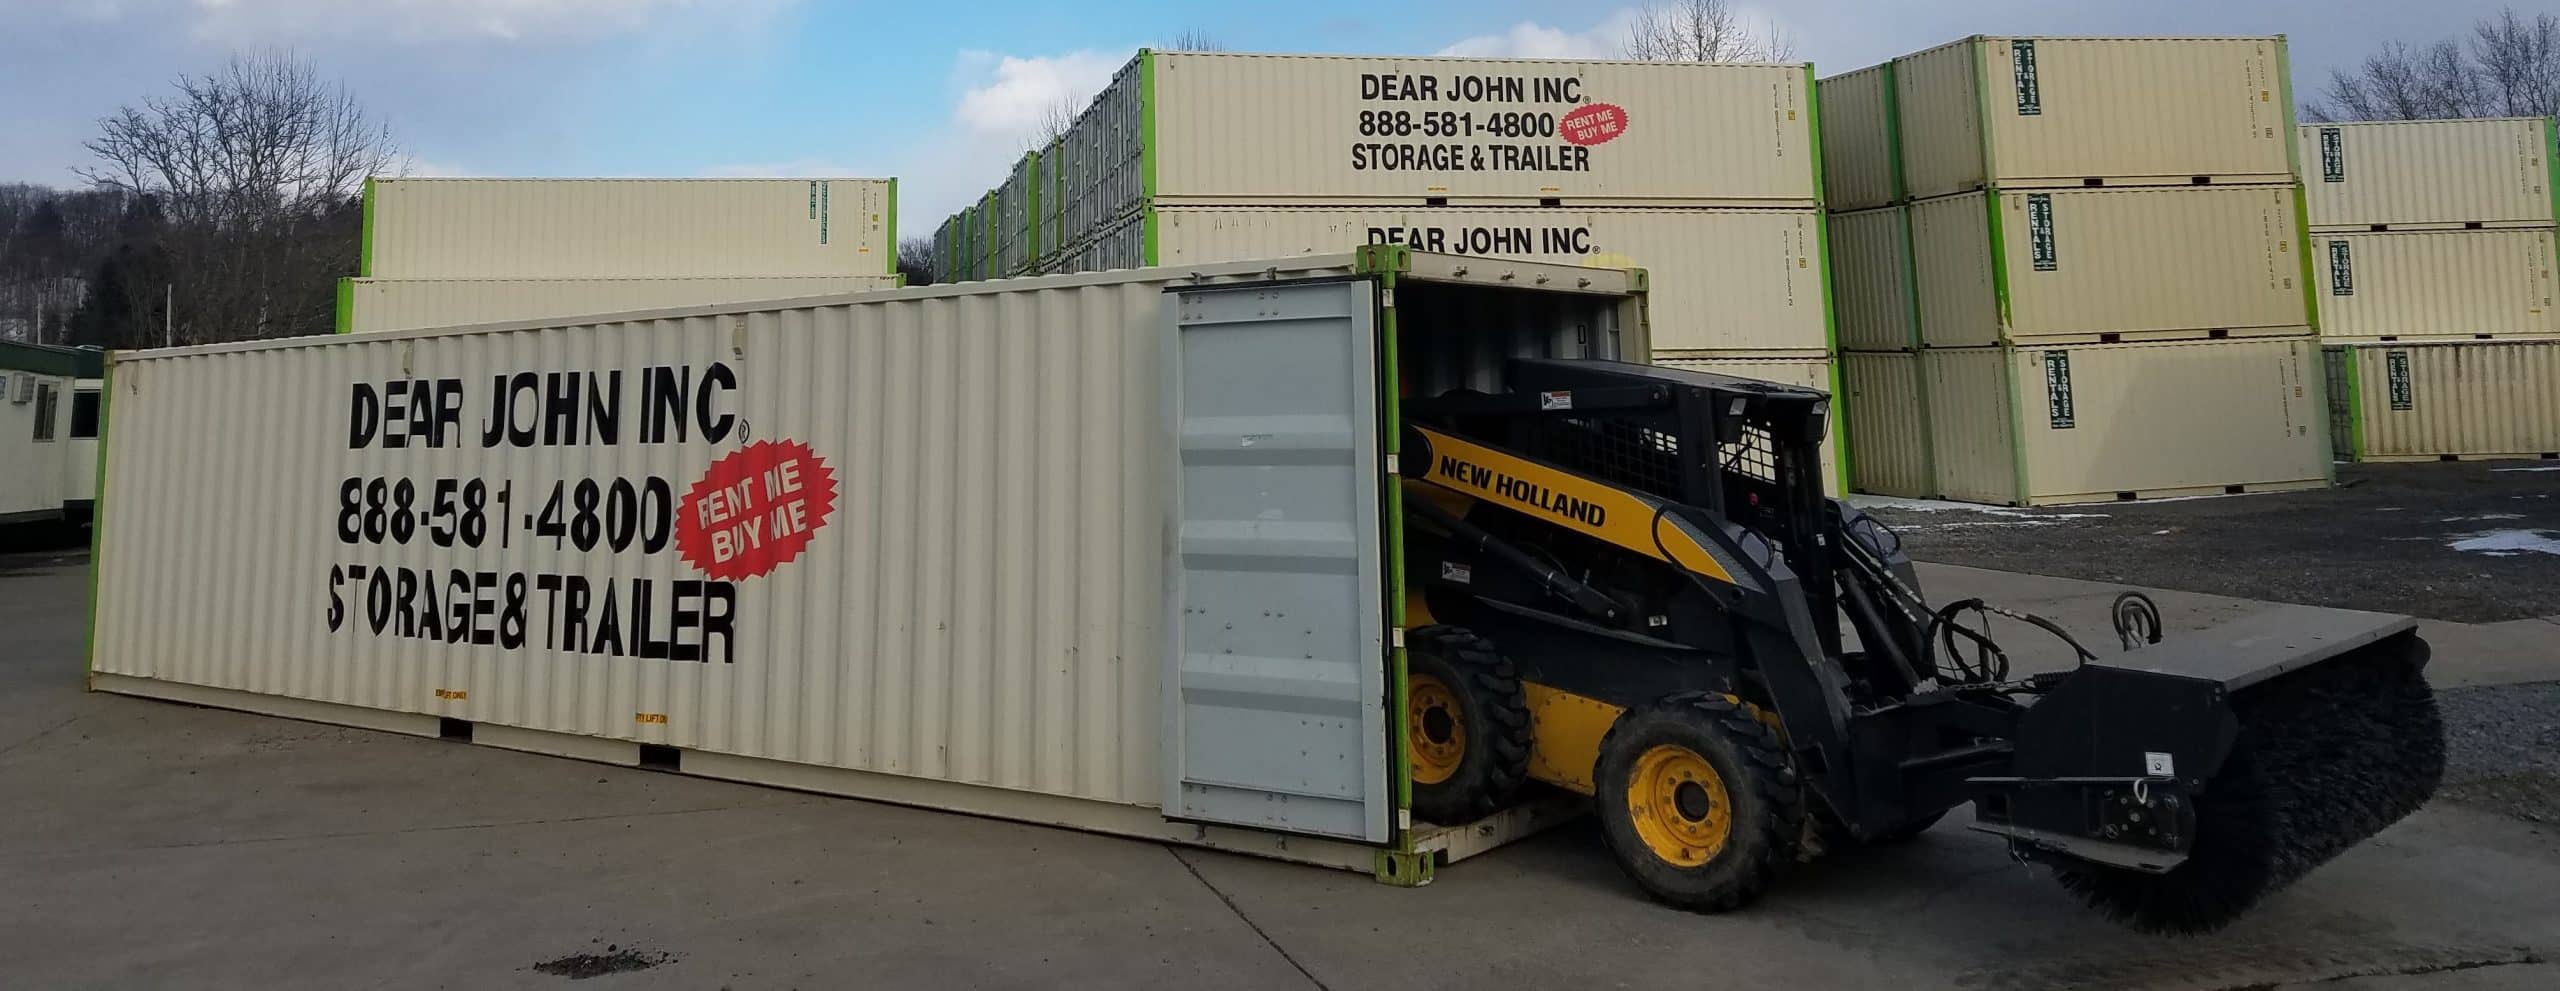 40 foot Storage Container for Advertising 2